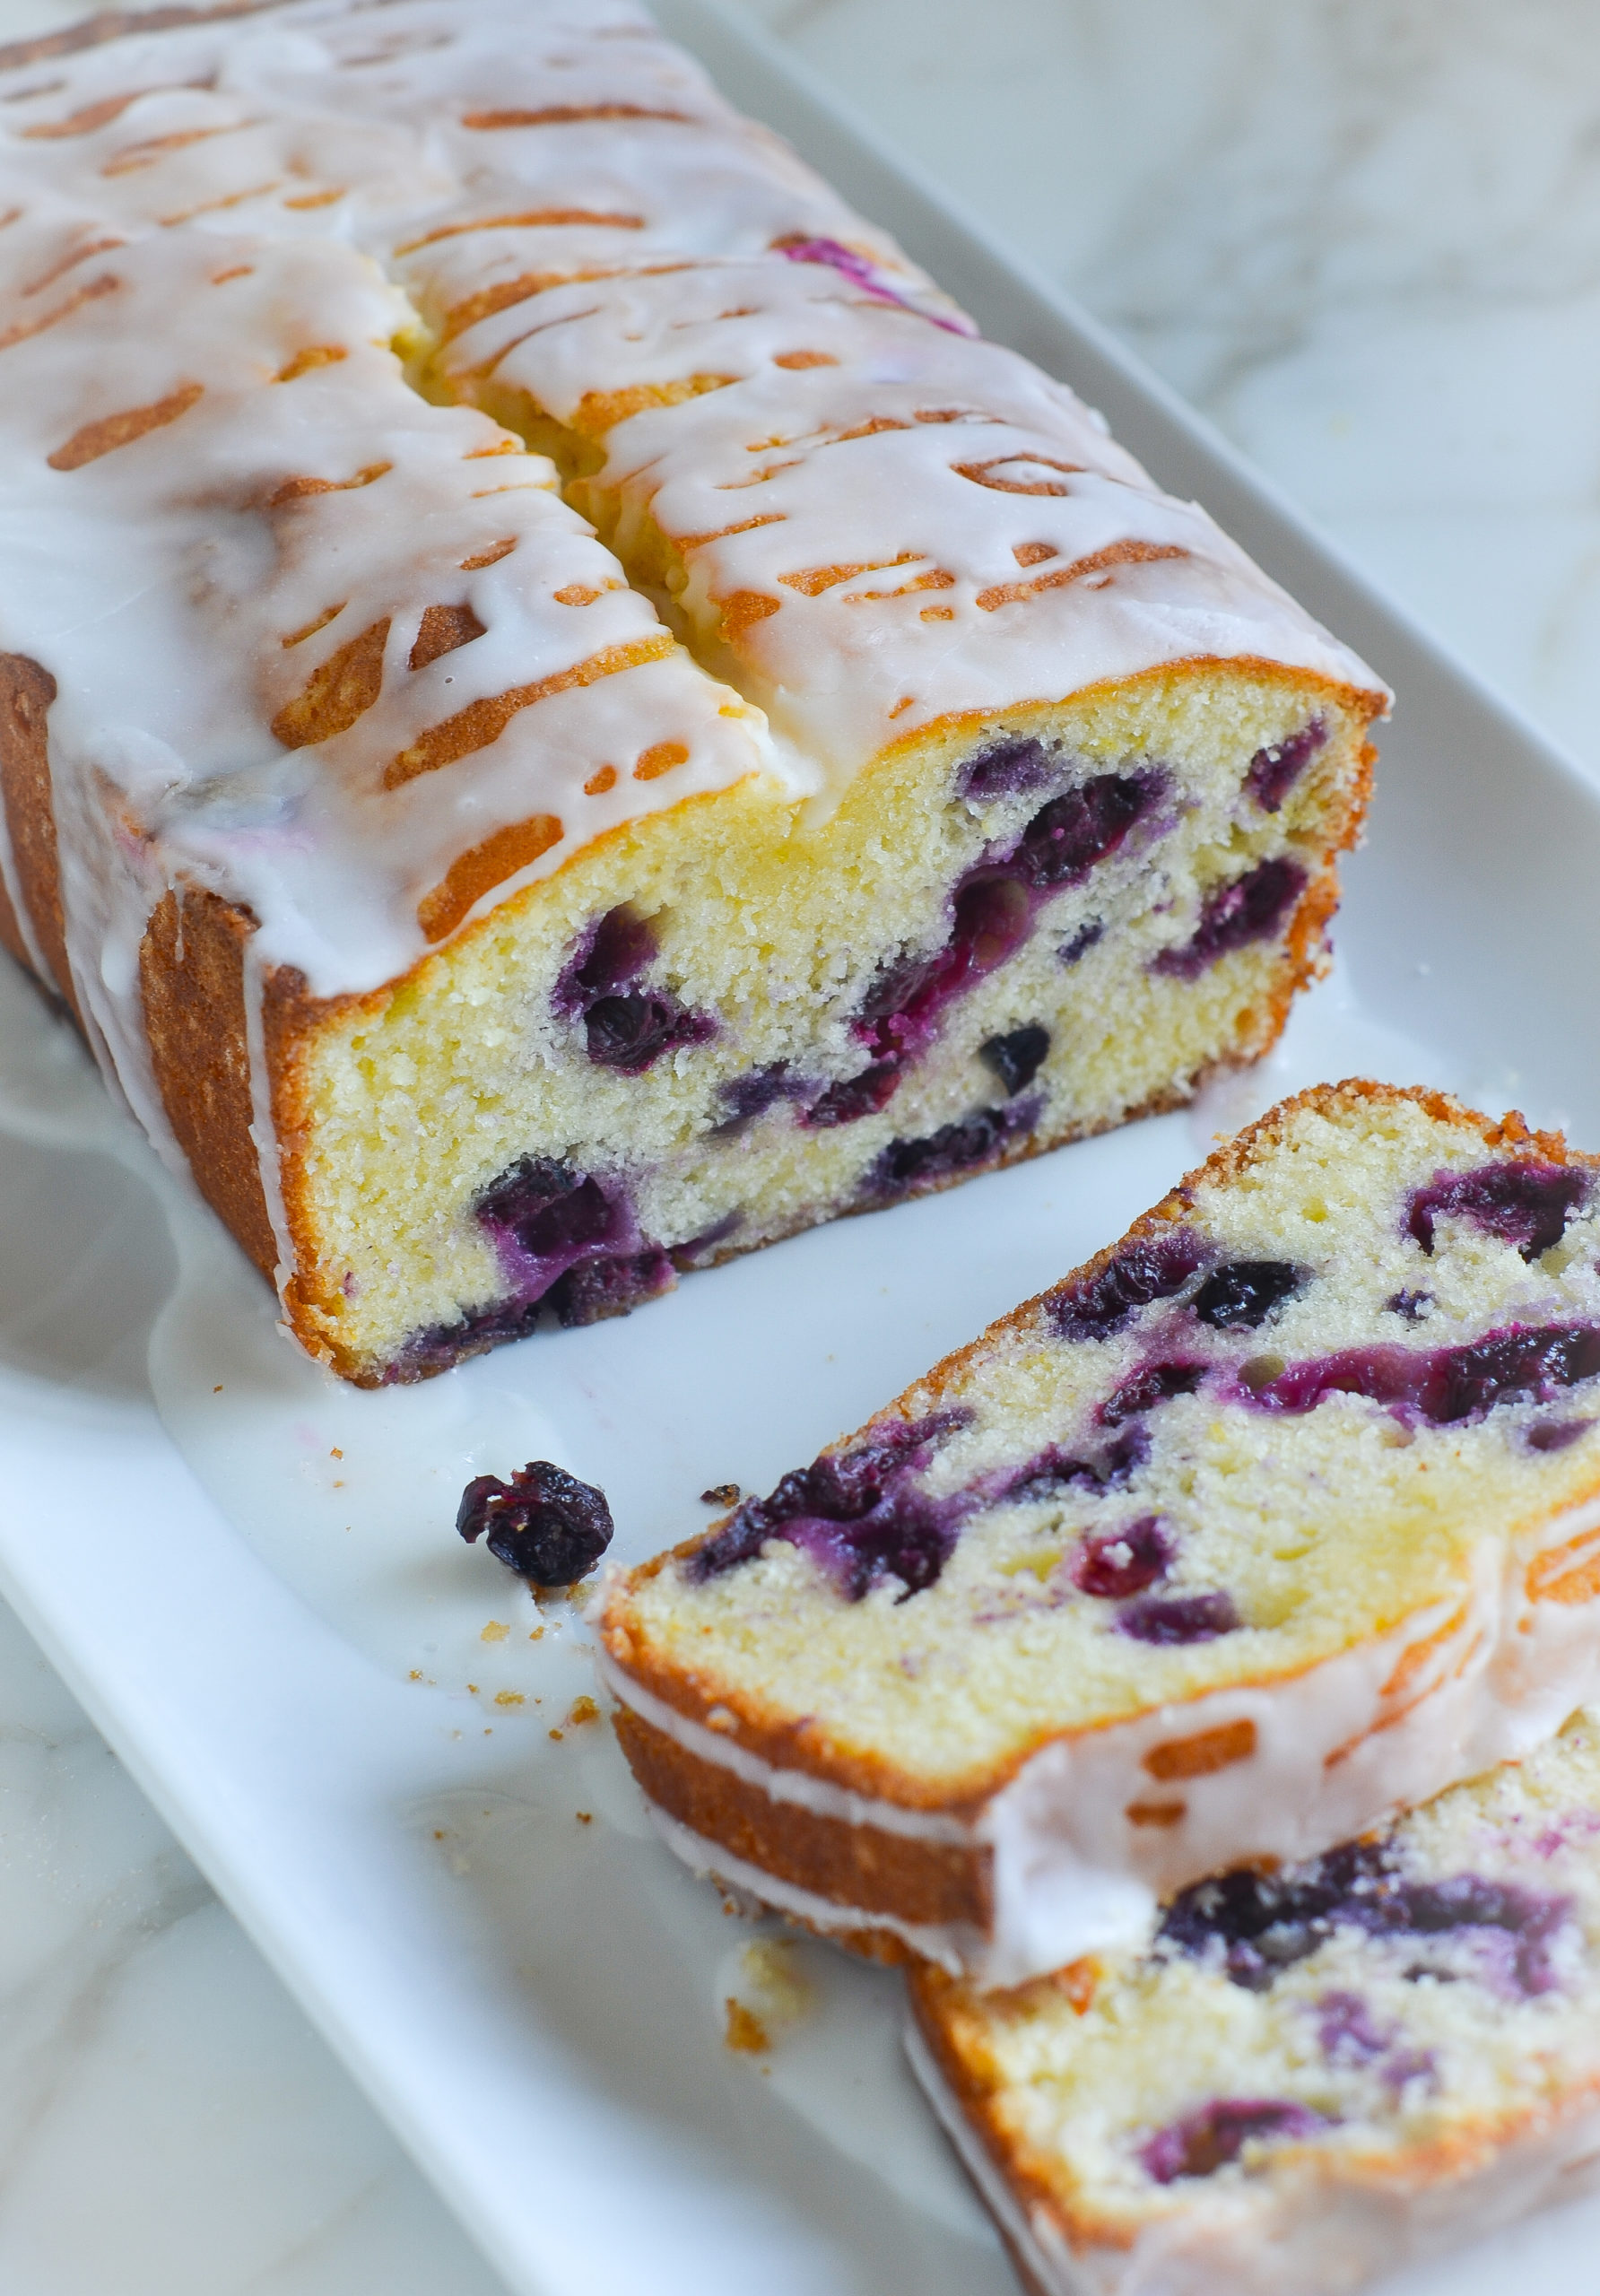 Blueberry Pound Cake Recipe: History, Nutrition, and Baking Tips